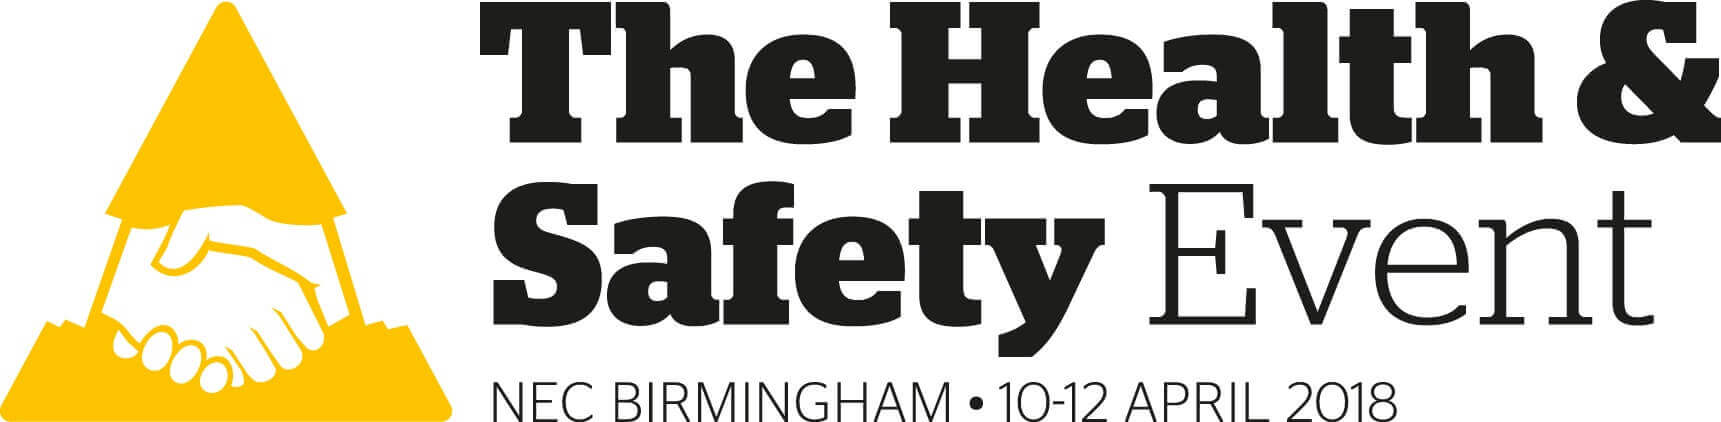 Health and Safety event logo Birmingham April 2018